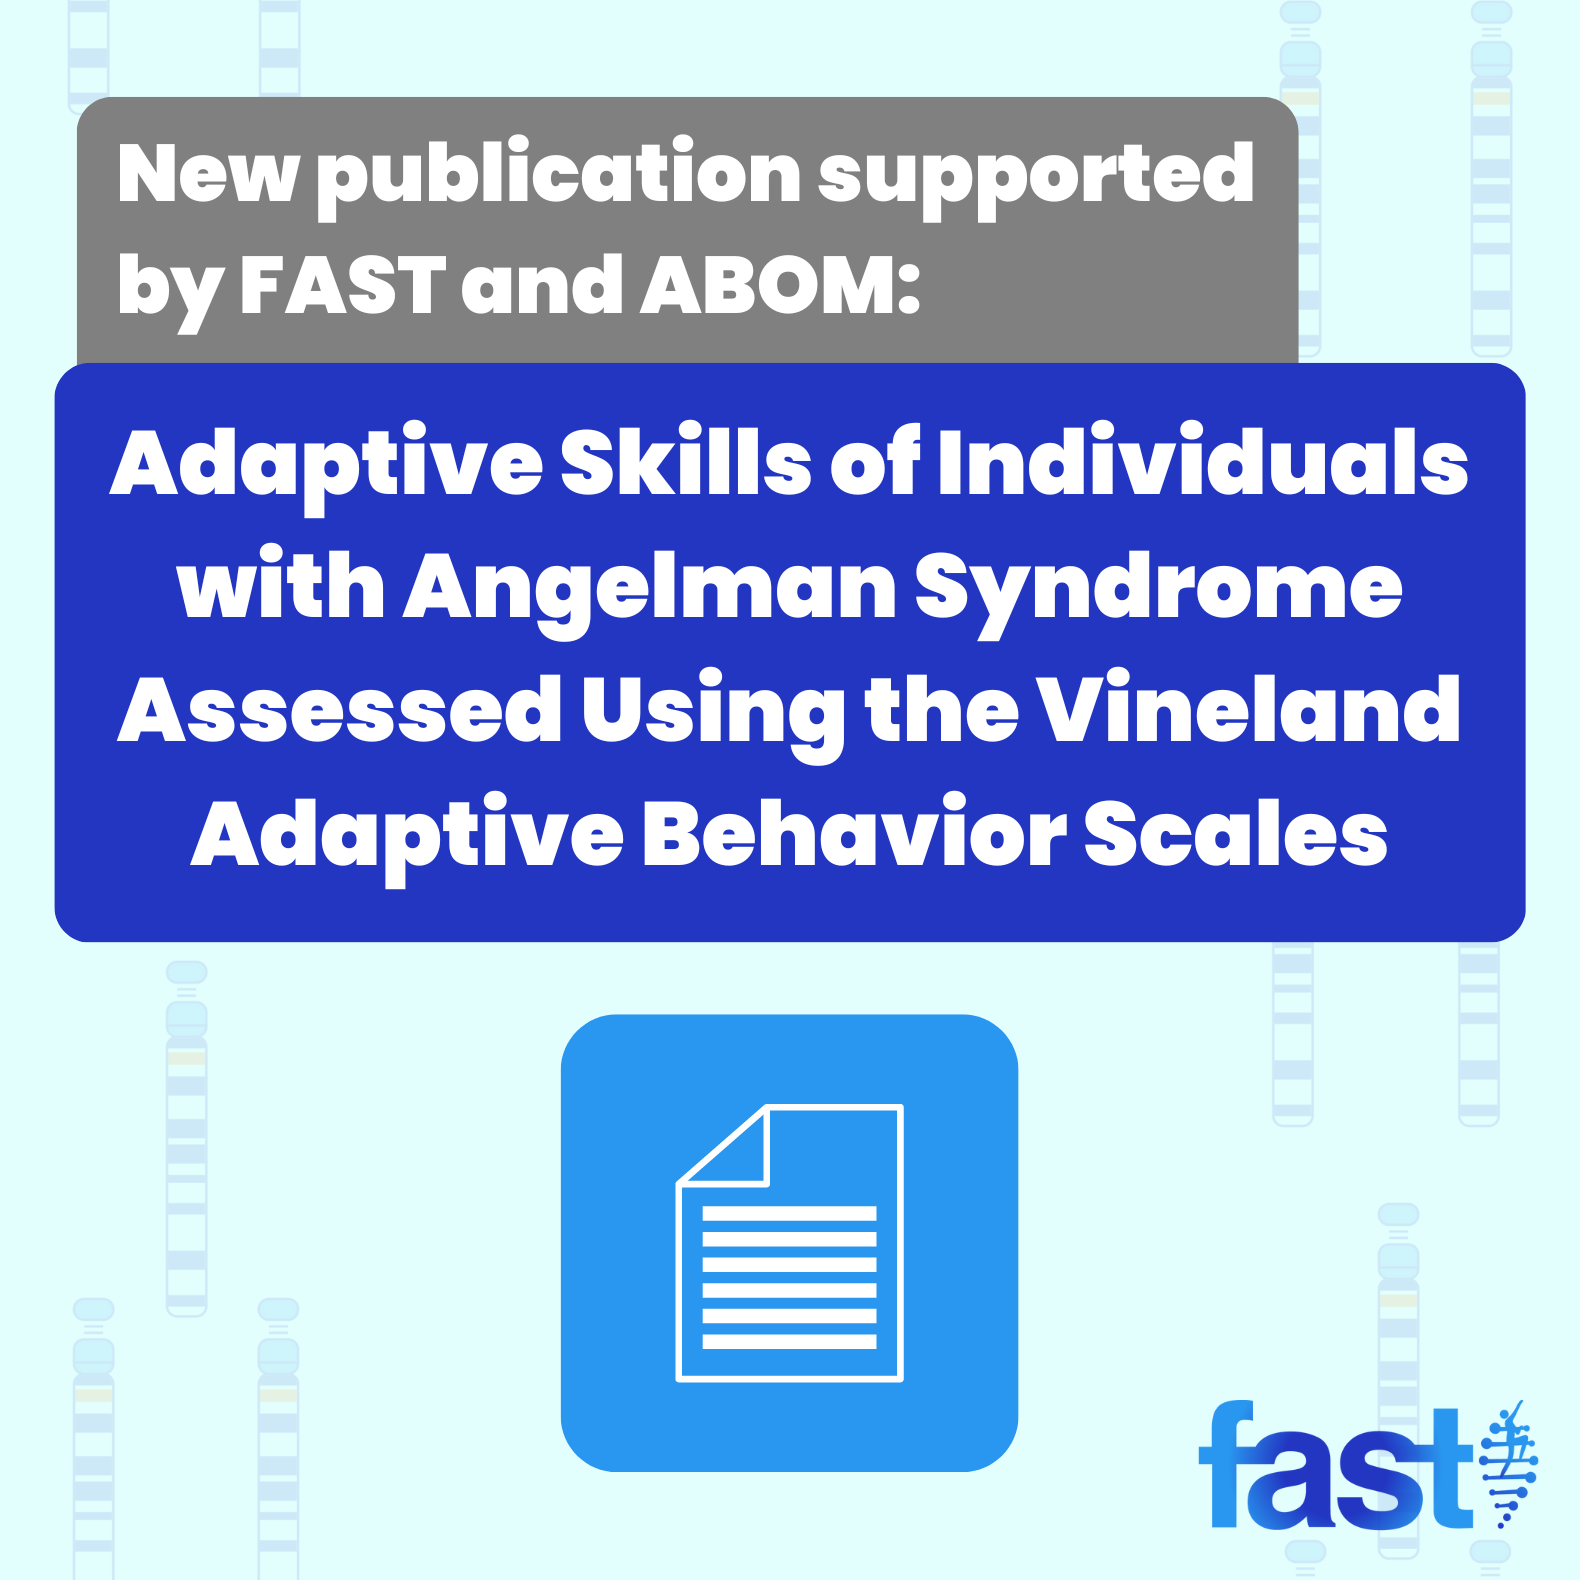 New publication supported by FAST and ABOM: Adaptive Skills of Individuals with Angelman Syndrome Assessed Using the Vineland Adaptive Behavior Scales, with an icon of a paper